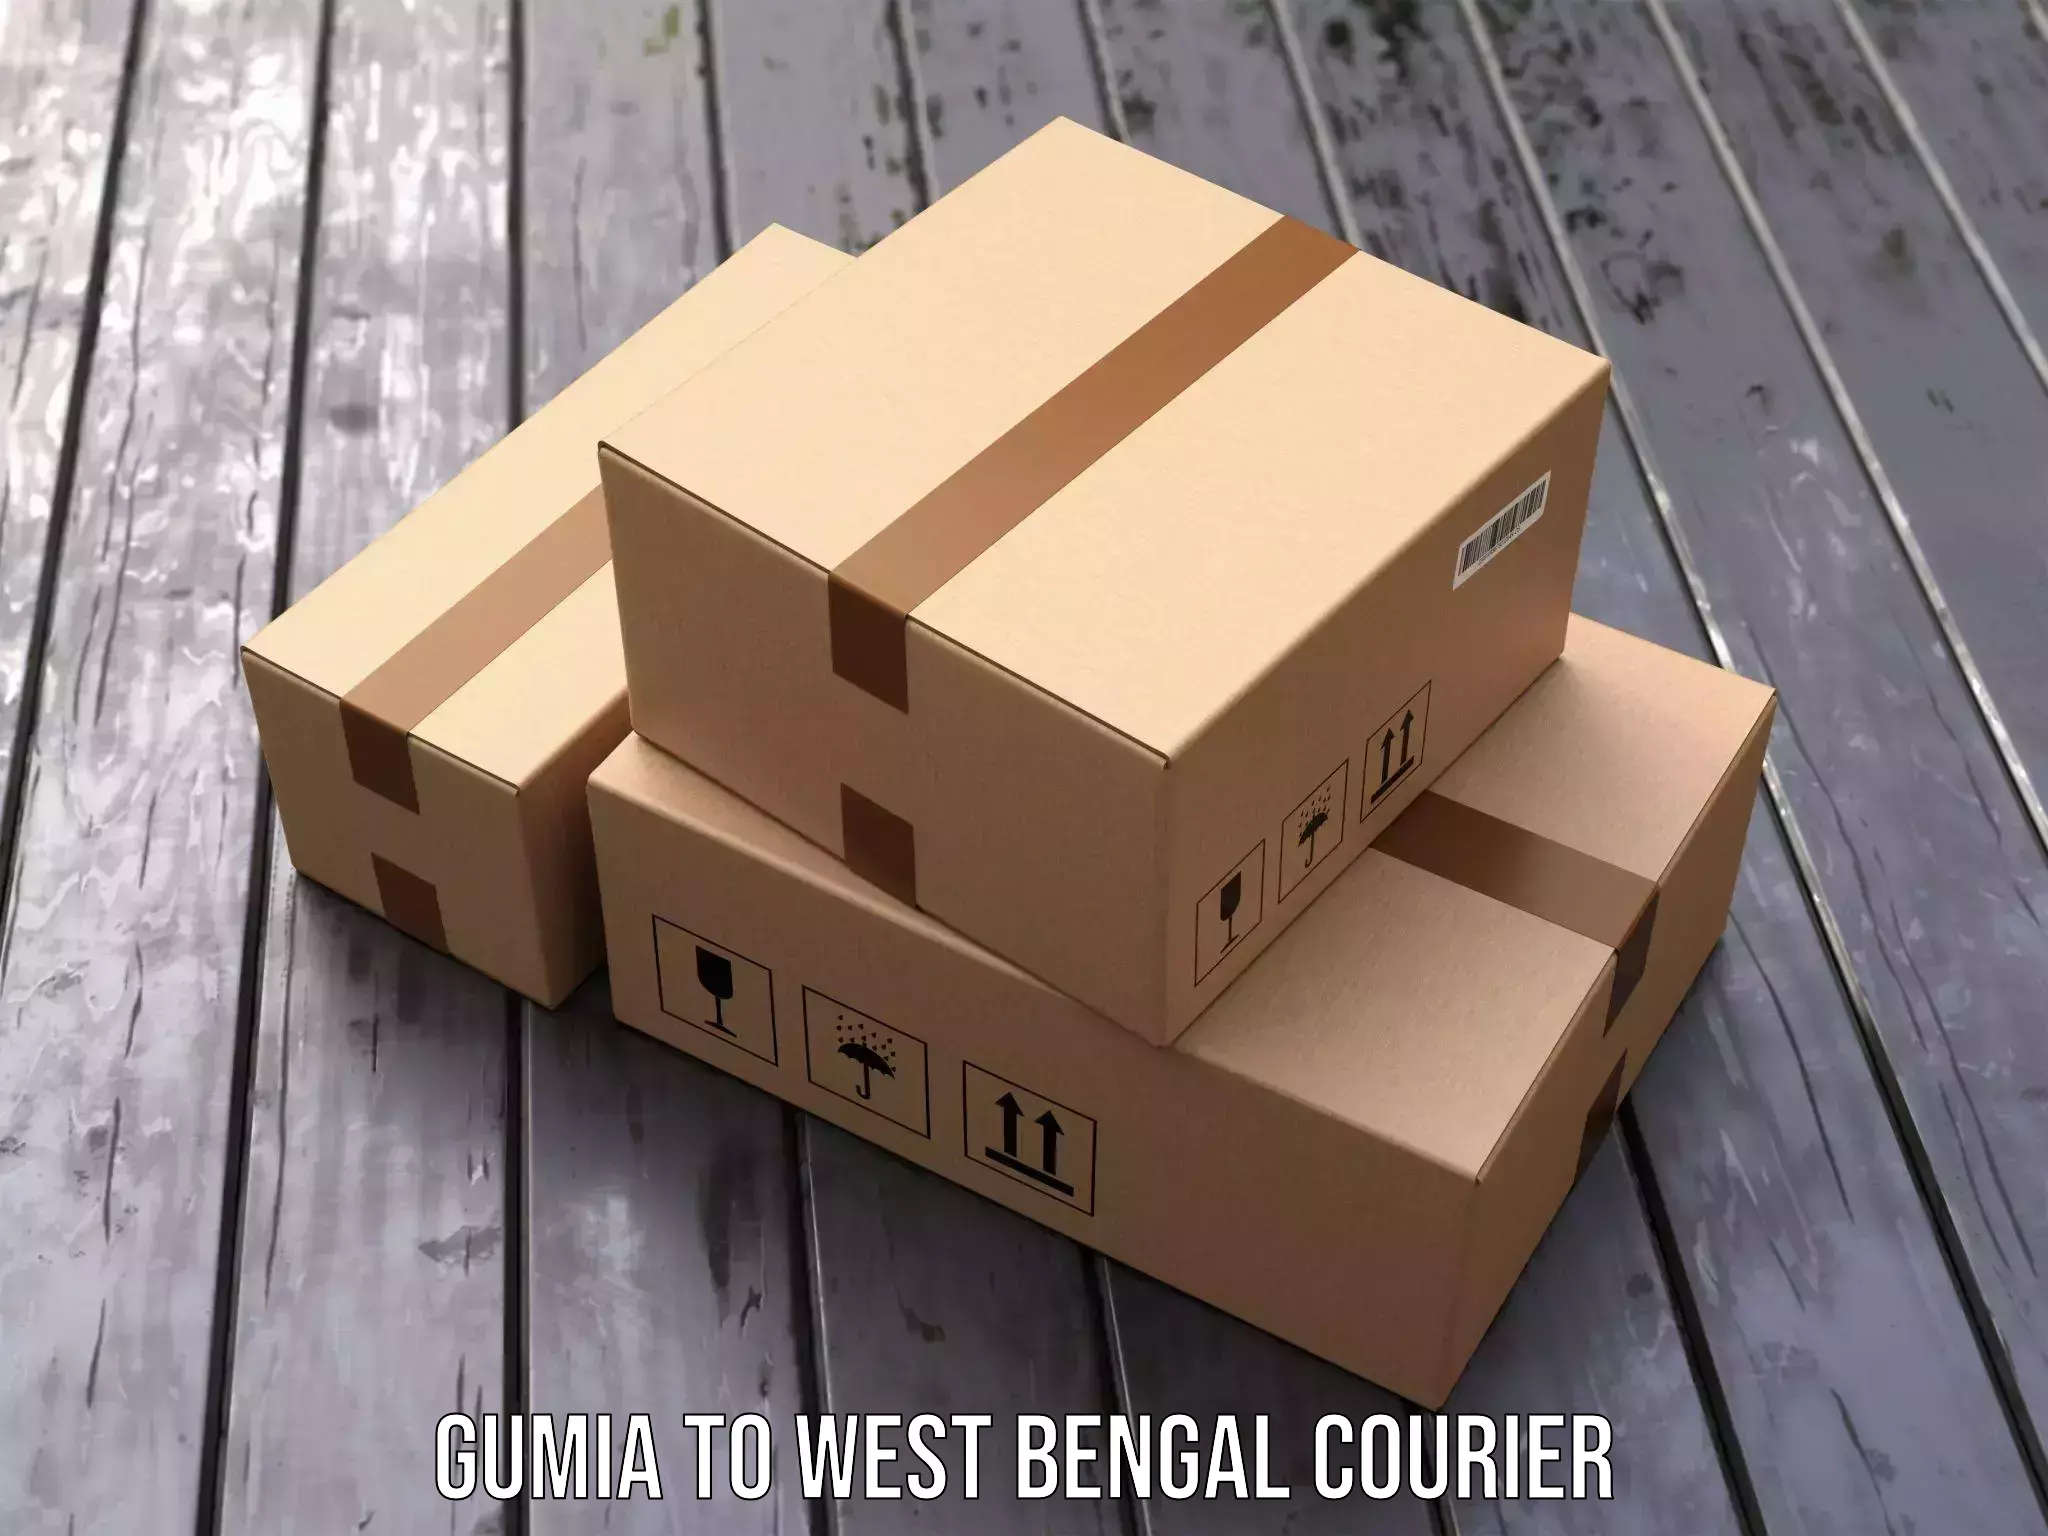 International courier networks Gumia to Champdani